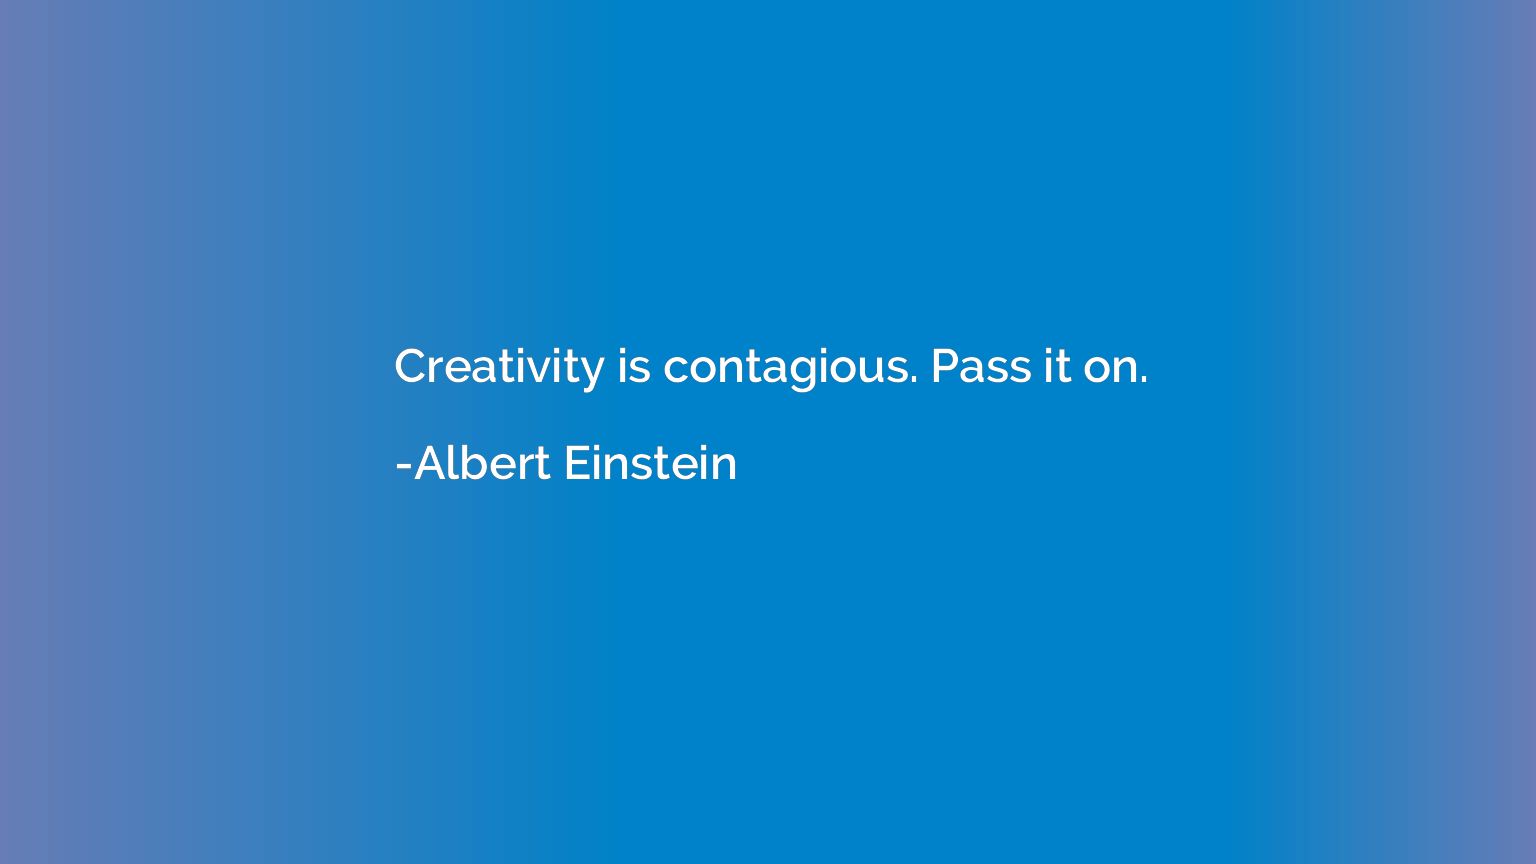 Creativity is contagious. Pass it on.